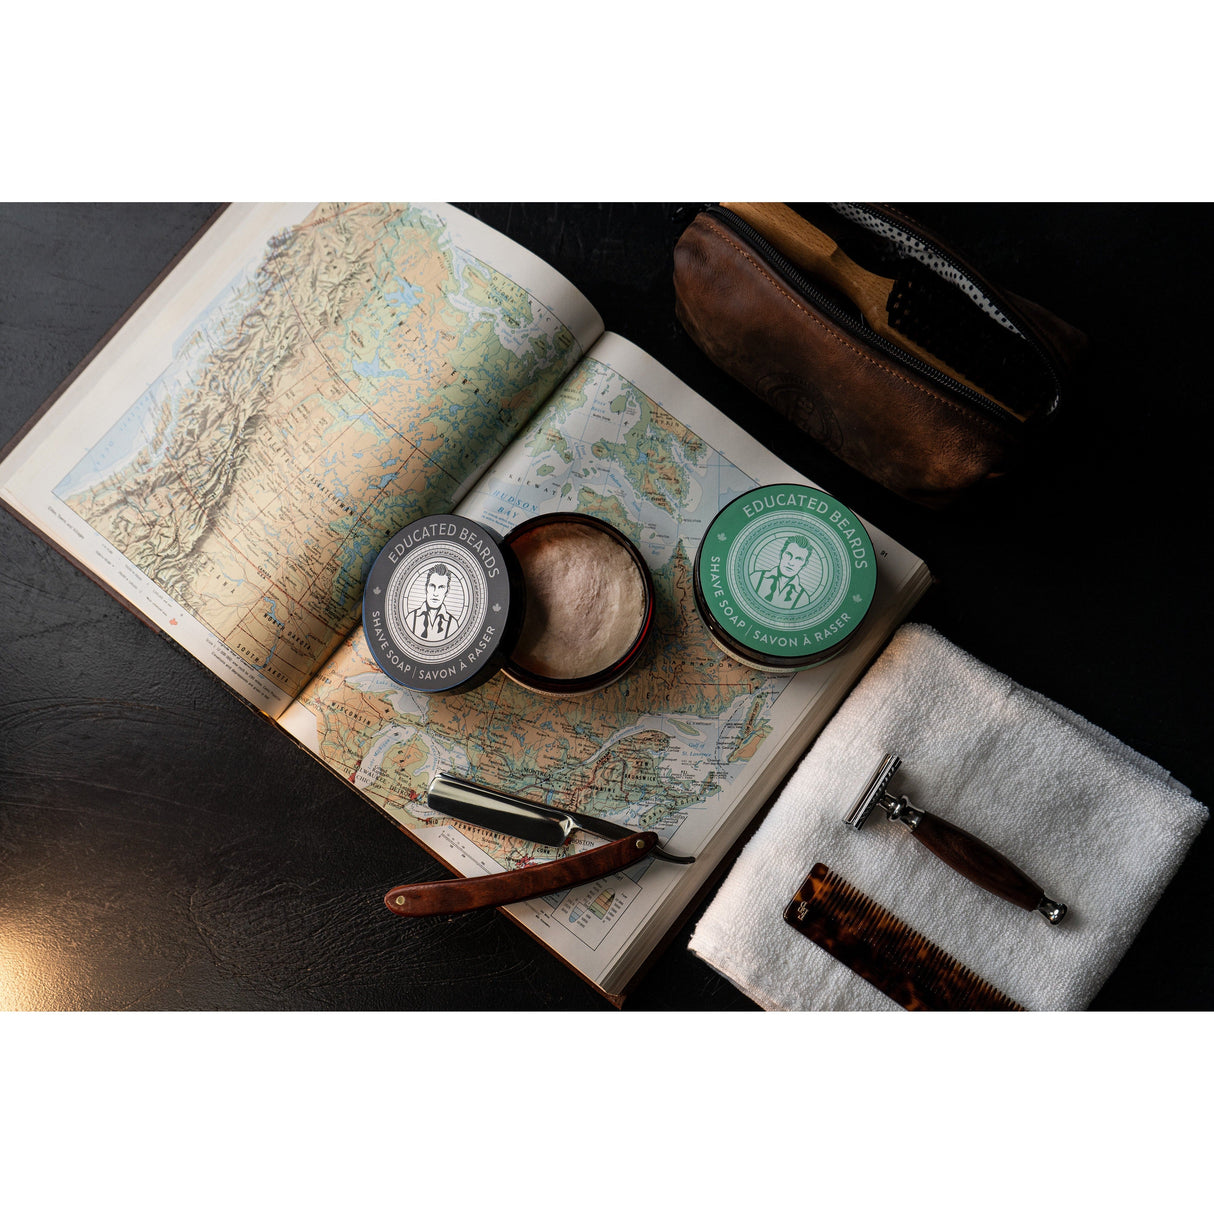 Shave Soap-Educated Beards